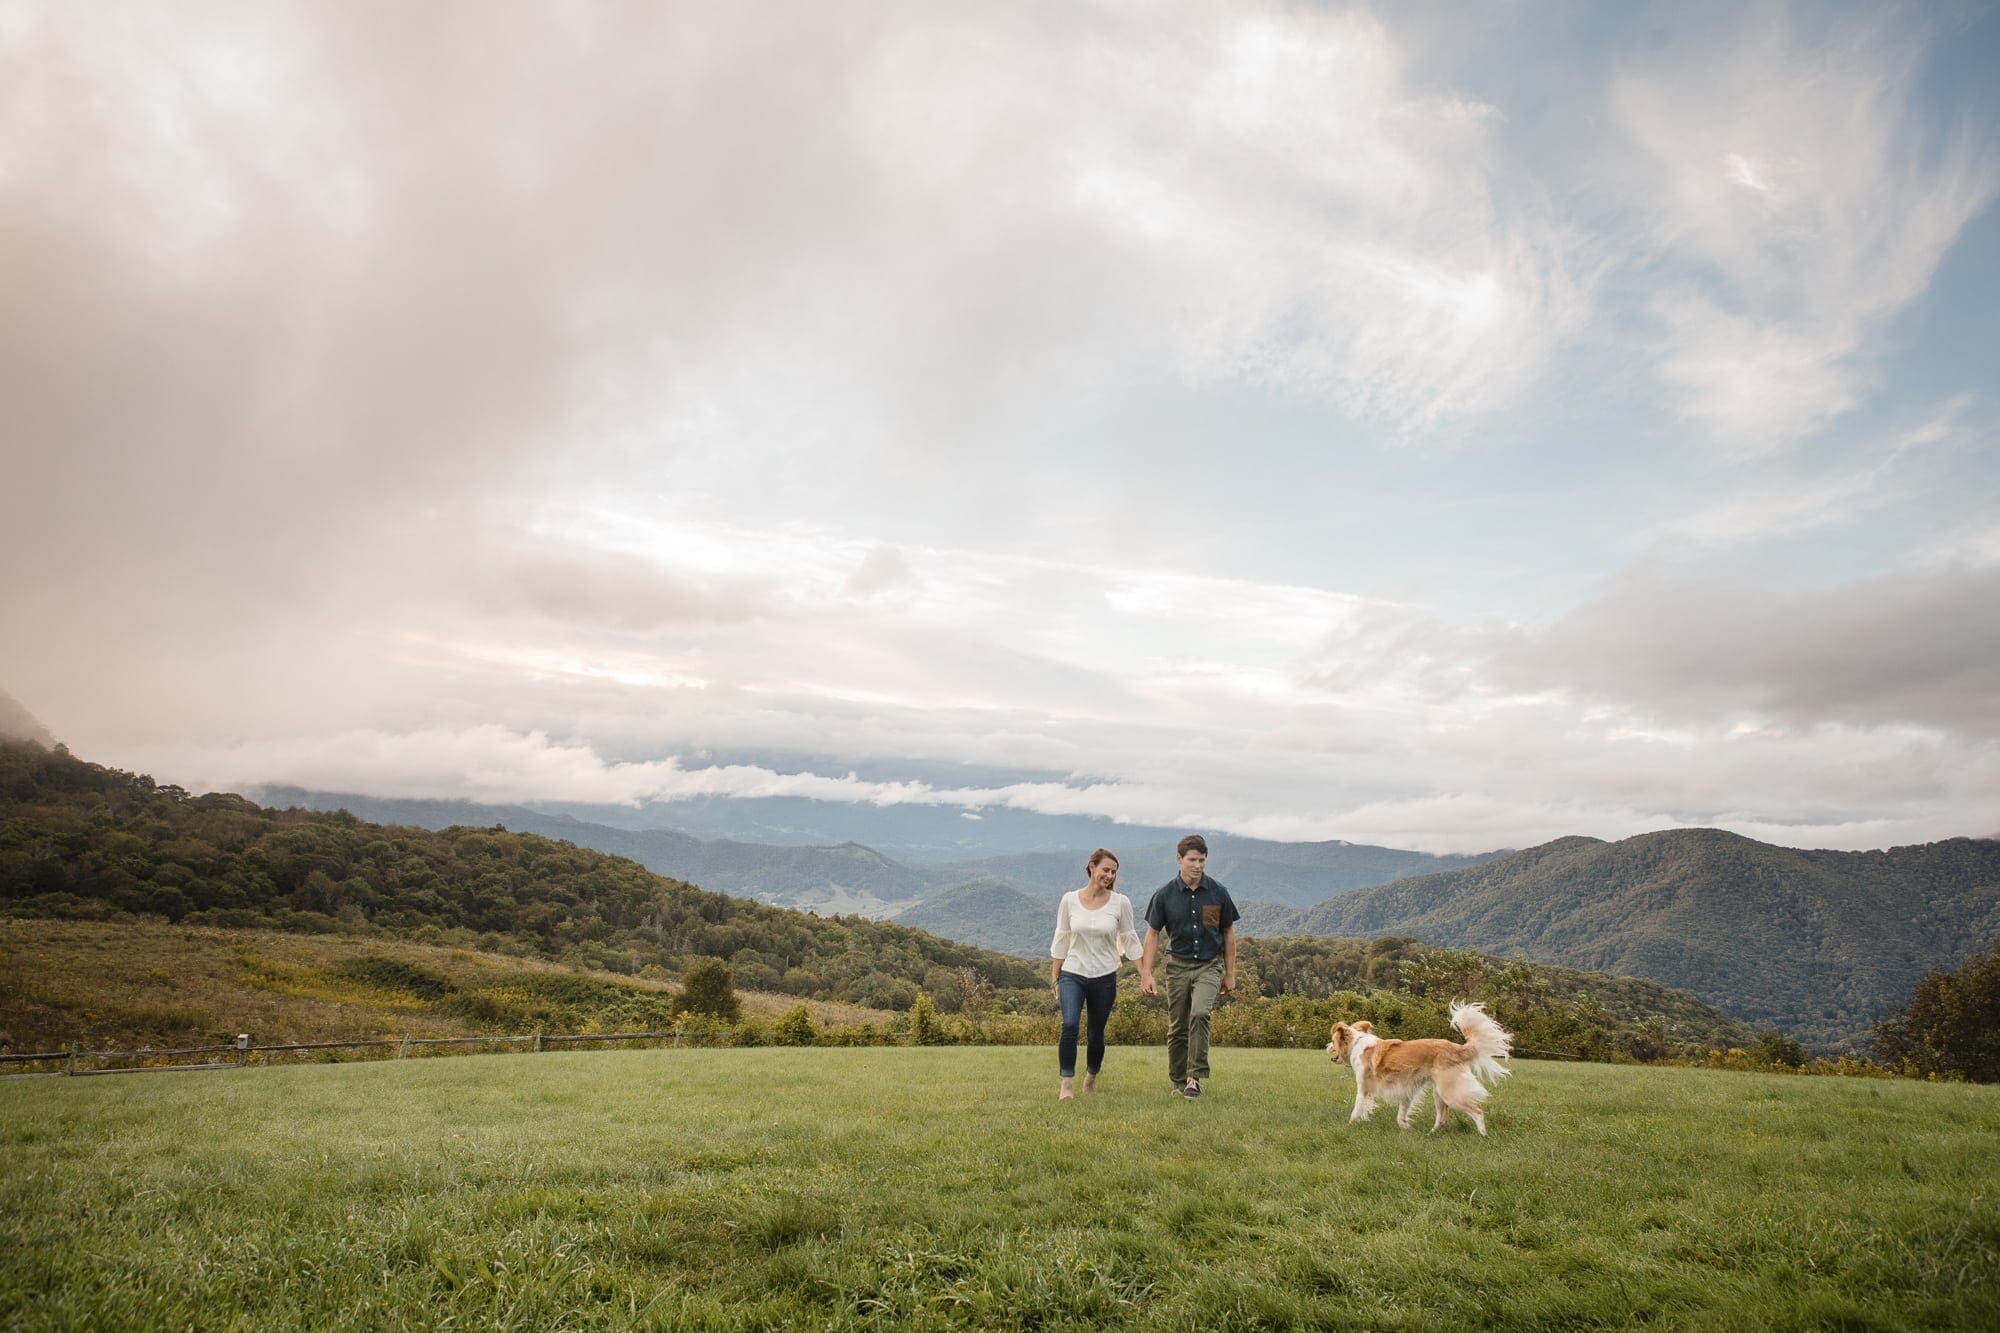 Couple walking and holding hands through field with their collie dog, mountains in the distance near Asheville North Carolina photography done by Kathy Beaver.